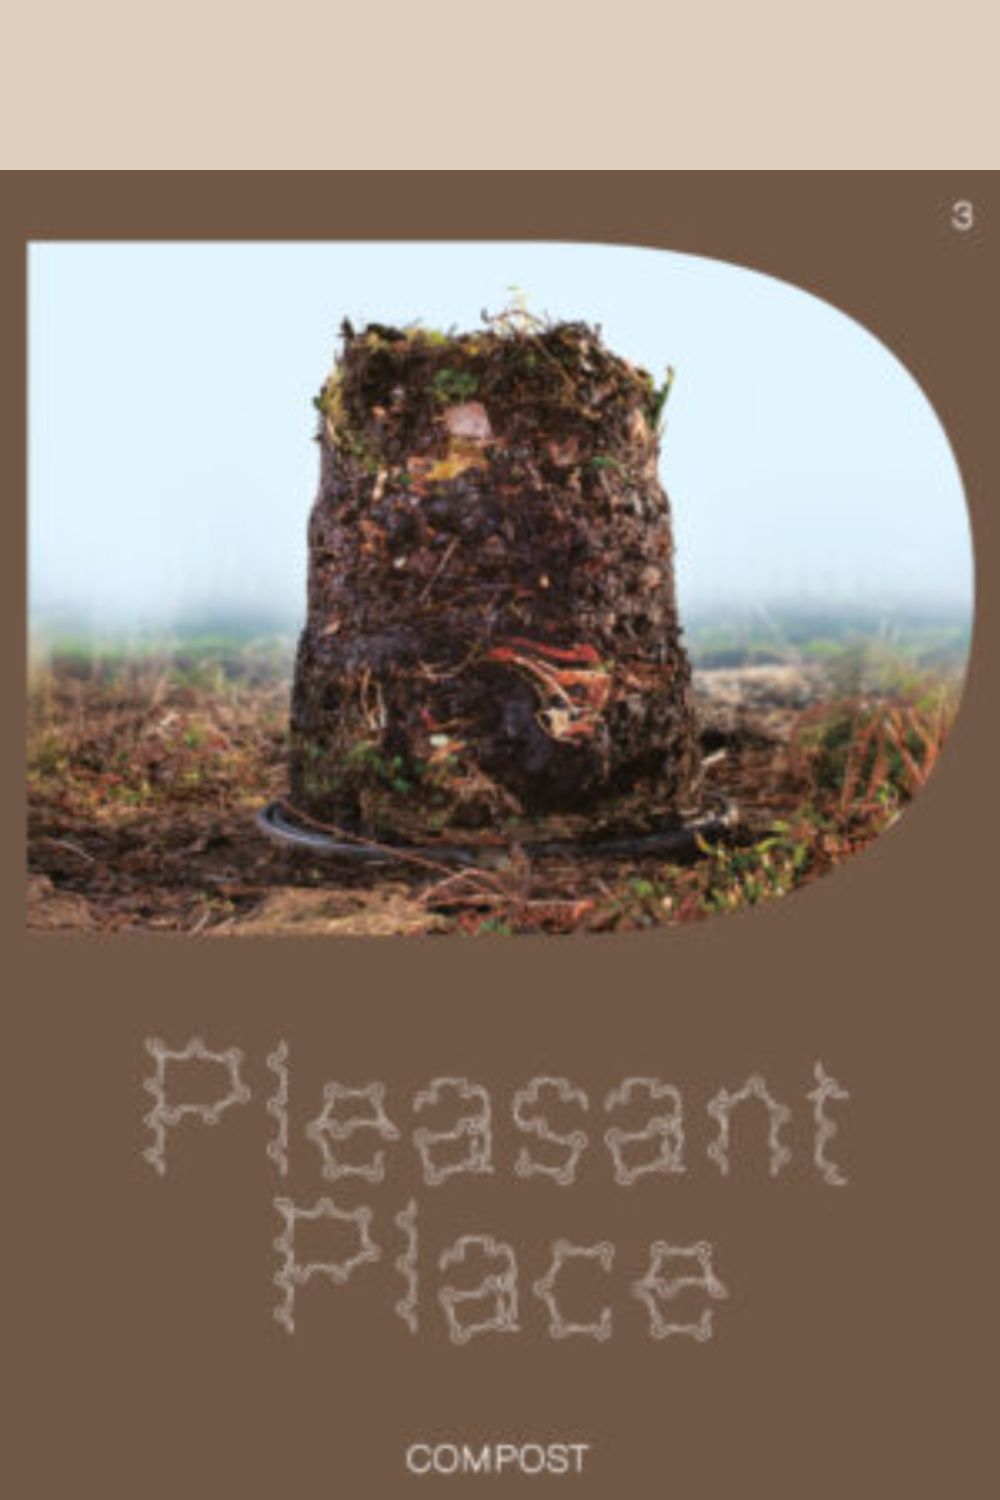 Pleasant Place Issue 3 cover with picture of a compost heap